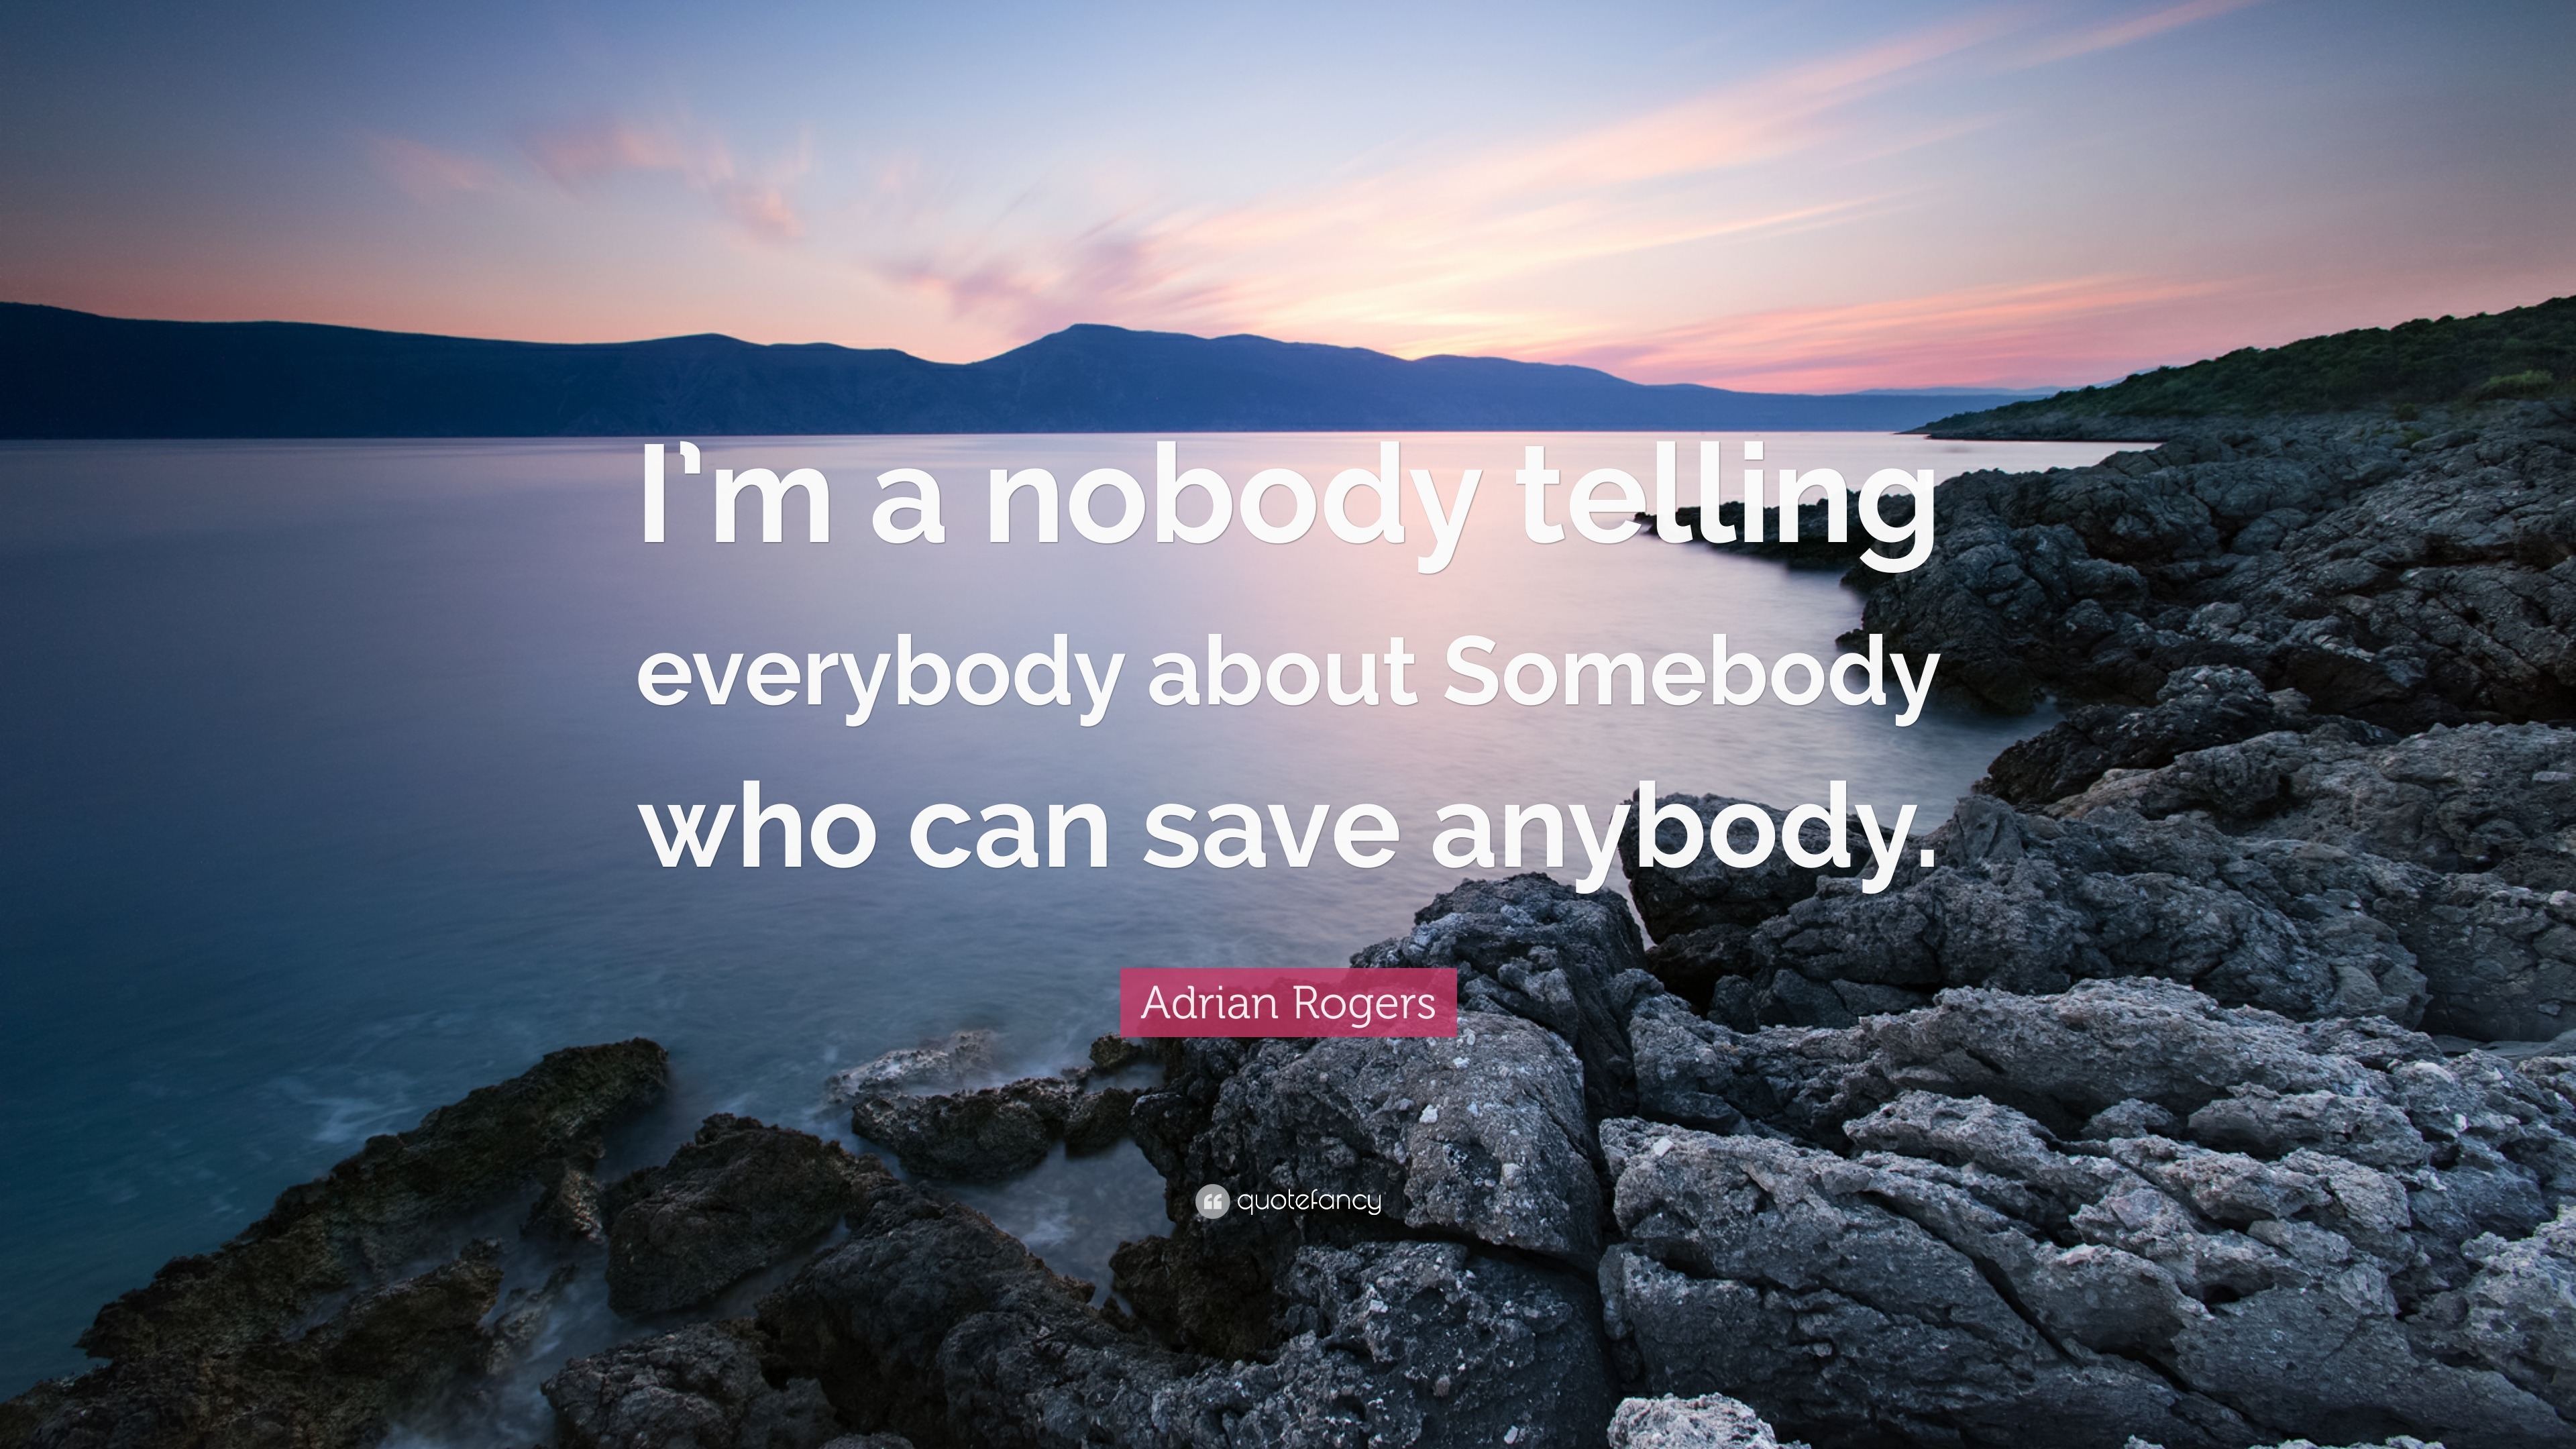 Adrian Rogers Quote: “I'm a nobody telling everybody about Somebody who can  save anybody.”